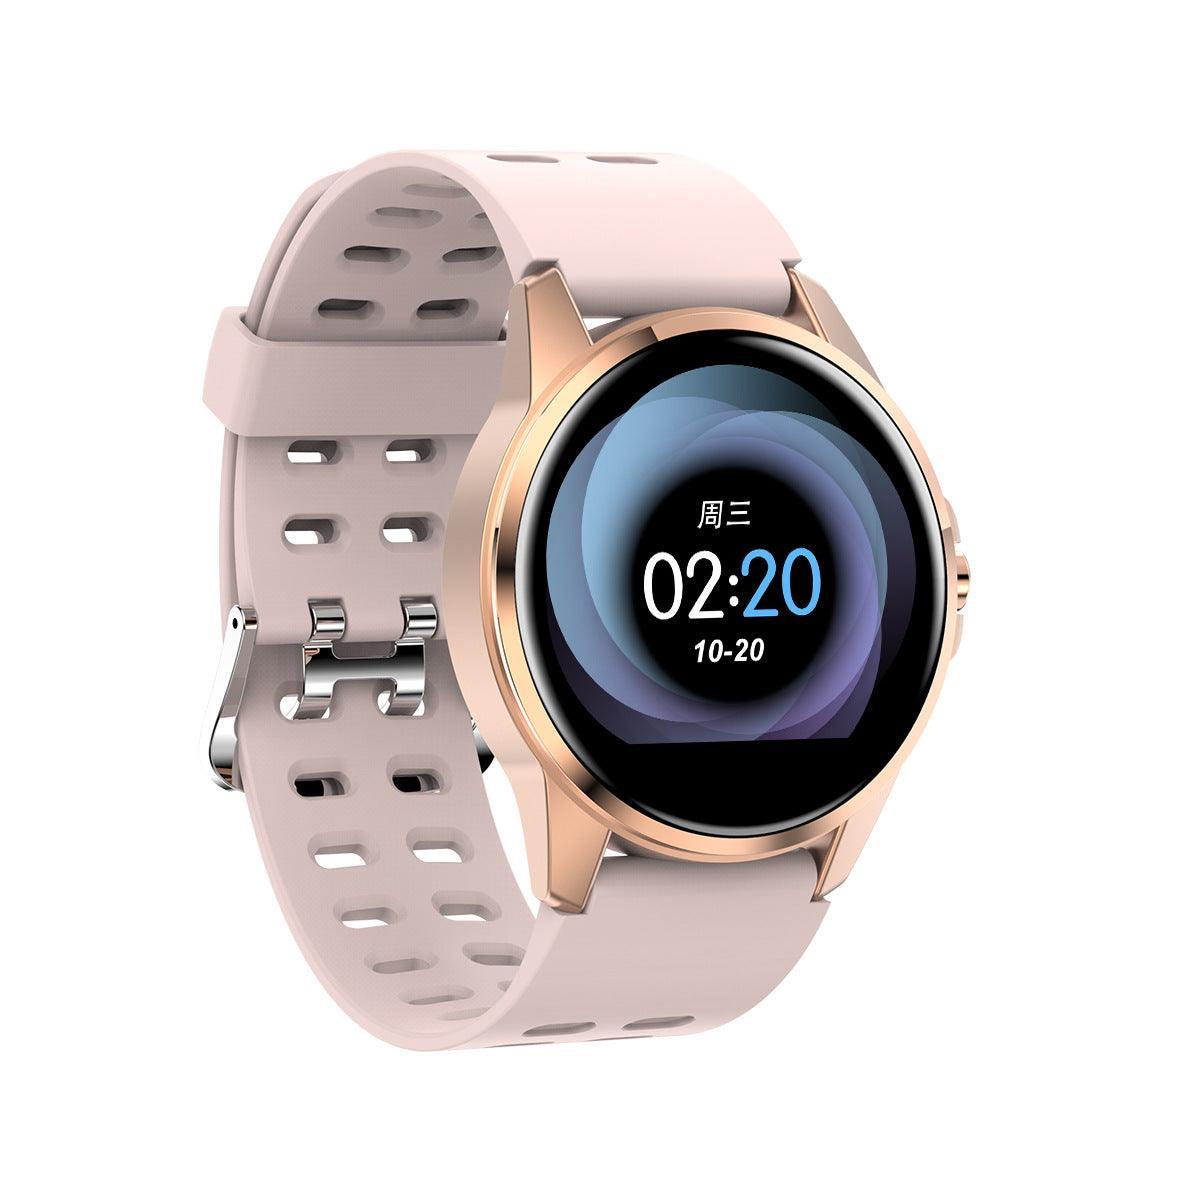 Full Touch Waterproof Sports Smartwatches - ForVanity smart watches, women's jewellery & watches Smartwatches